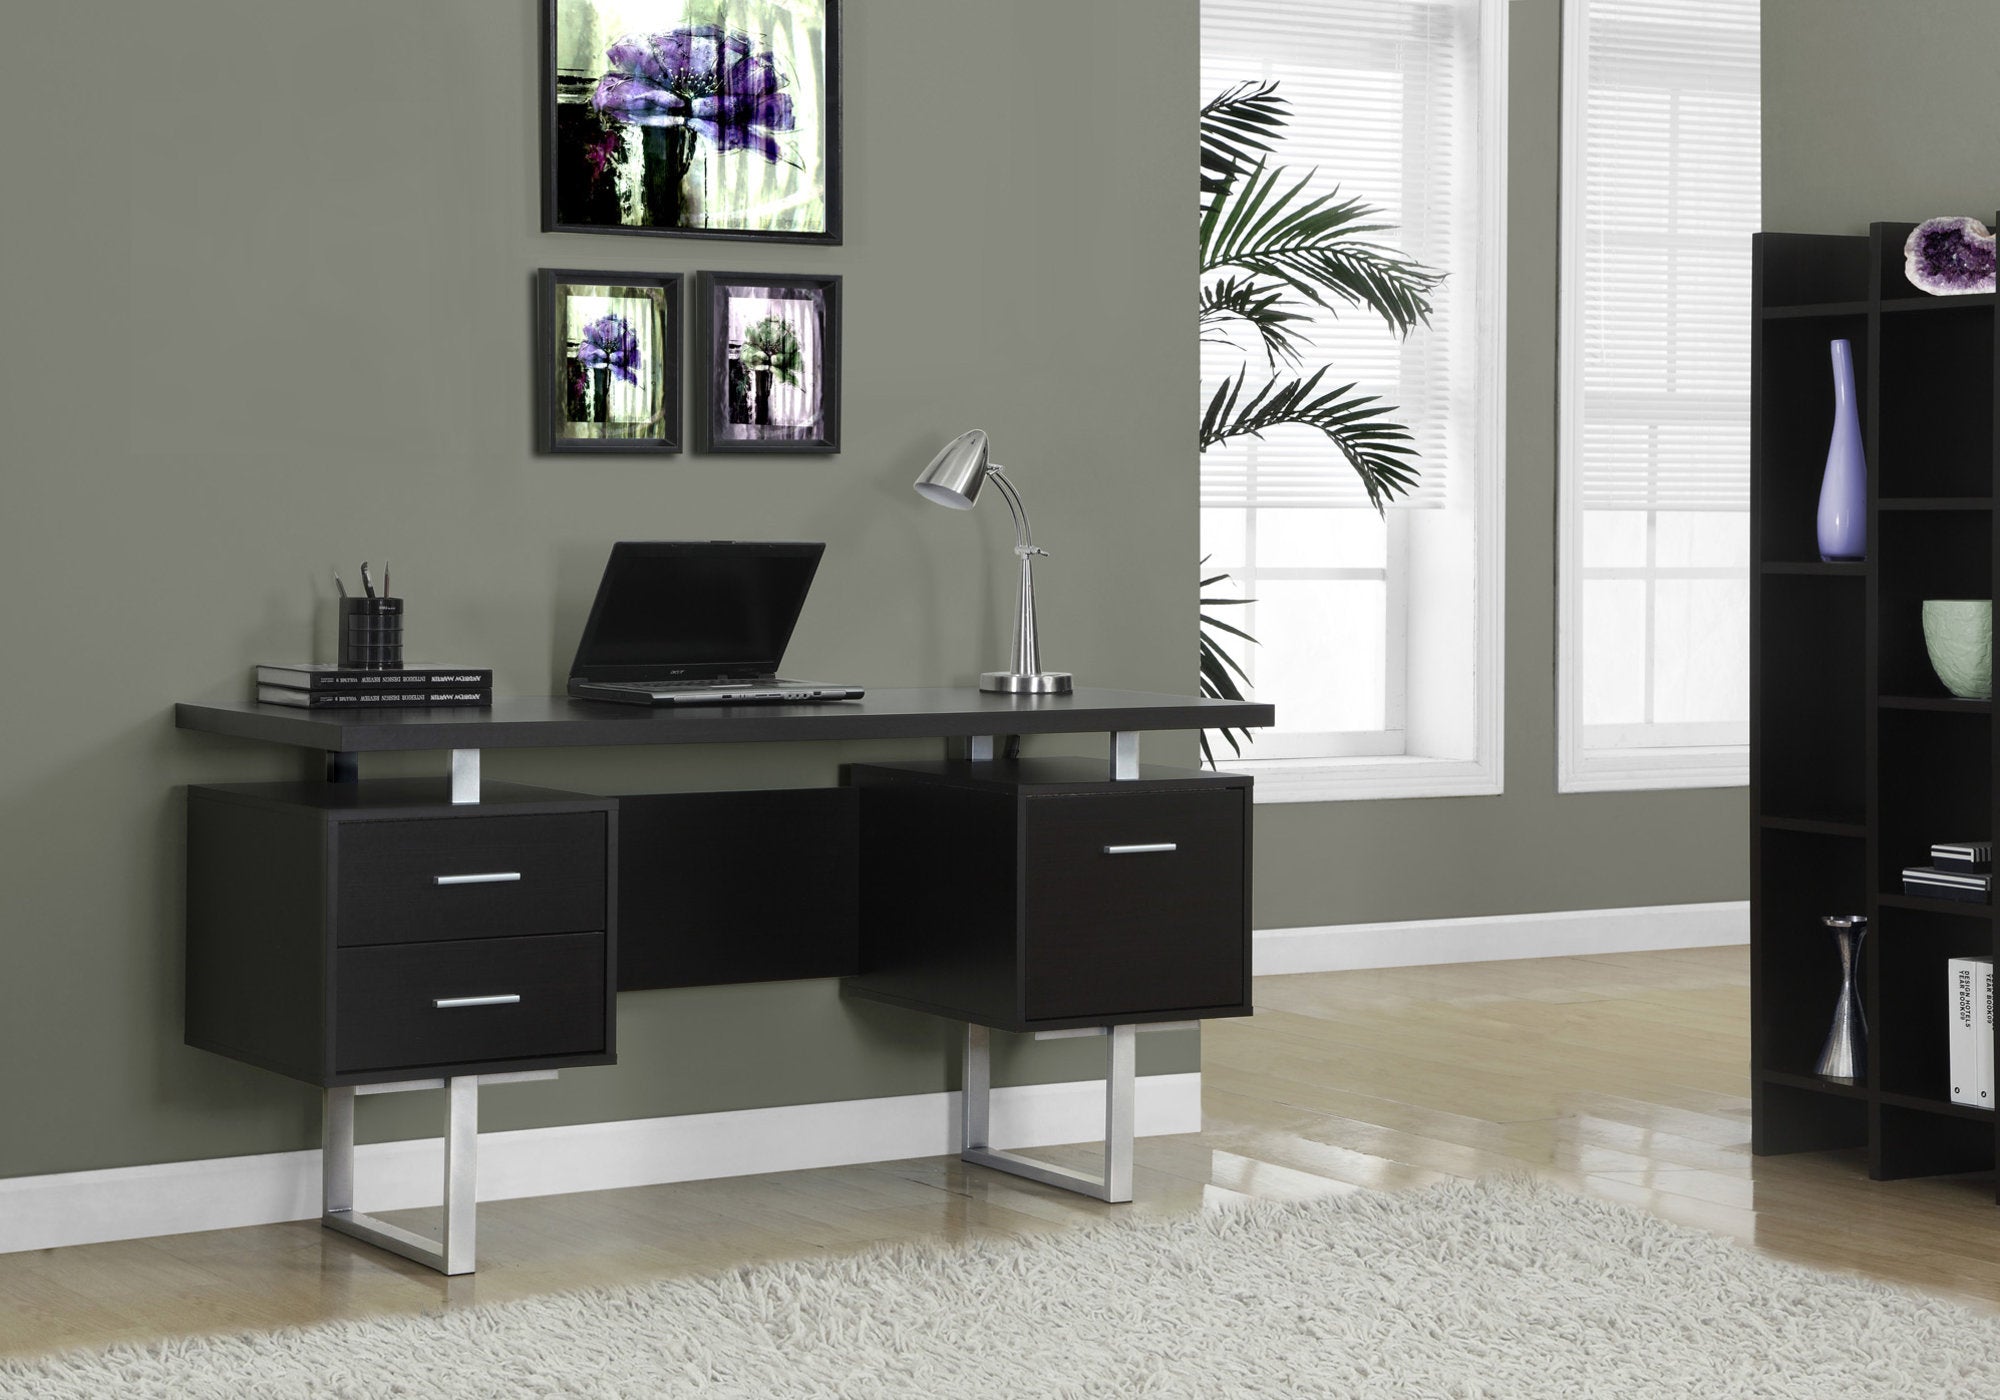 MN-937080    Computer Desk, Home Office, Laptop, Left, Right Set-Up, Storage Drawers, 60"L, Metal, Laminate, Dark Brown, Silver, Contemporary, Modern